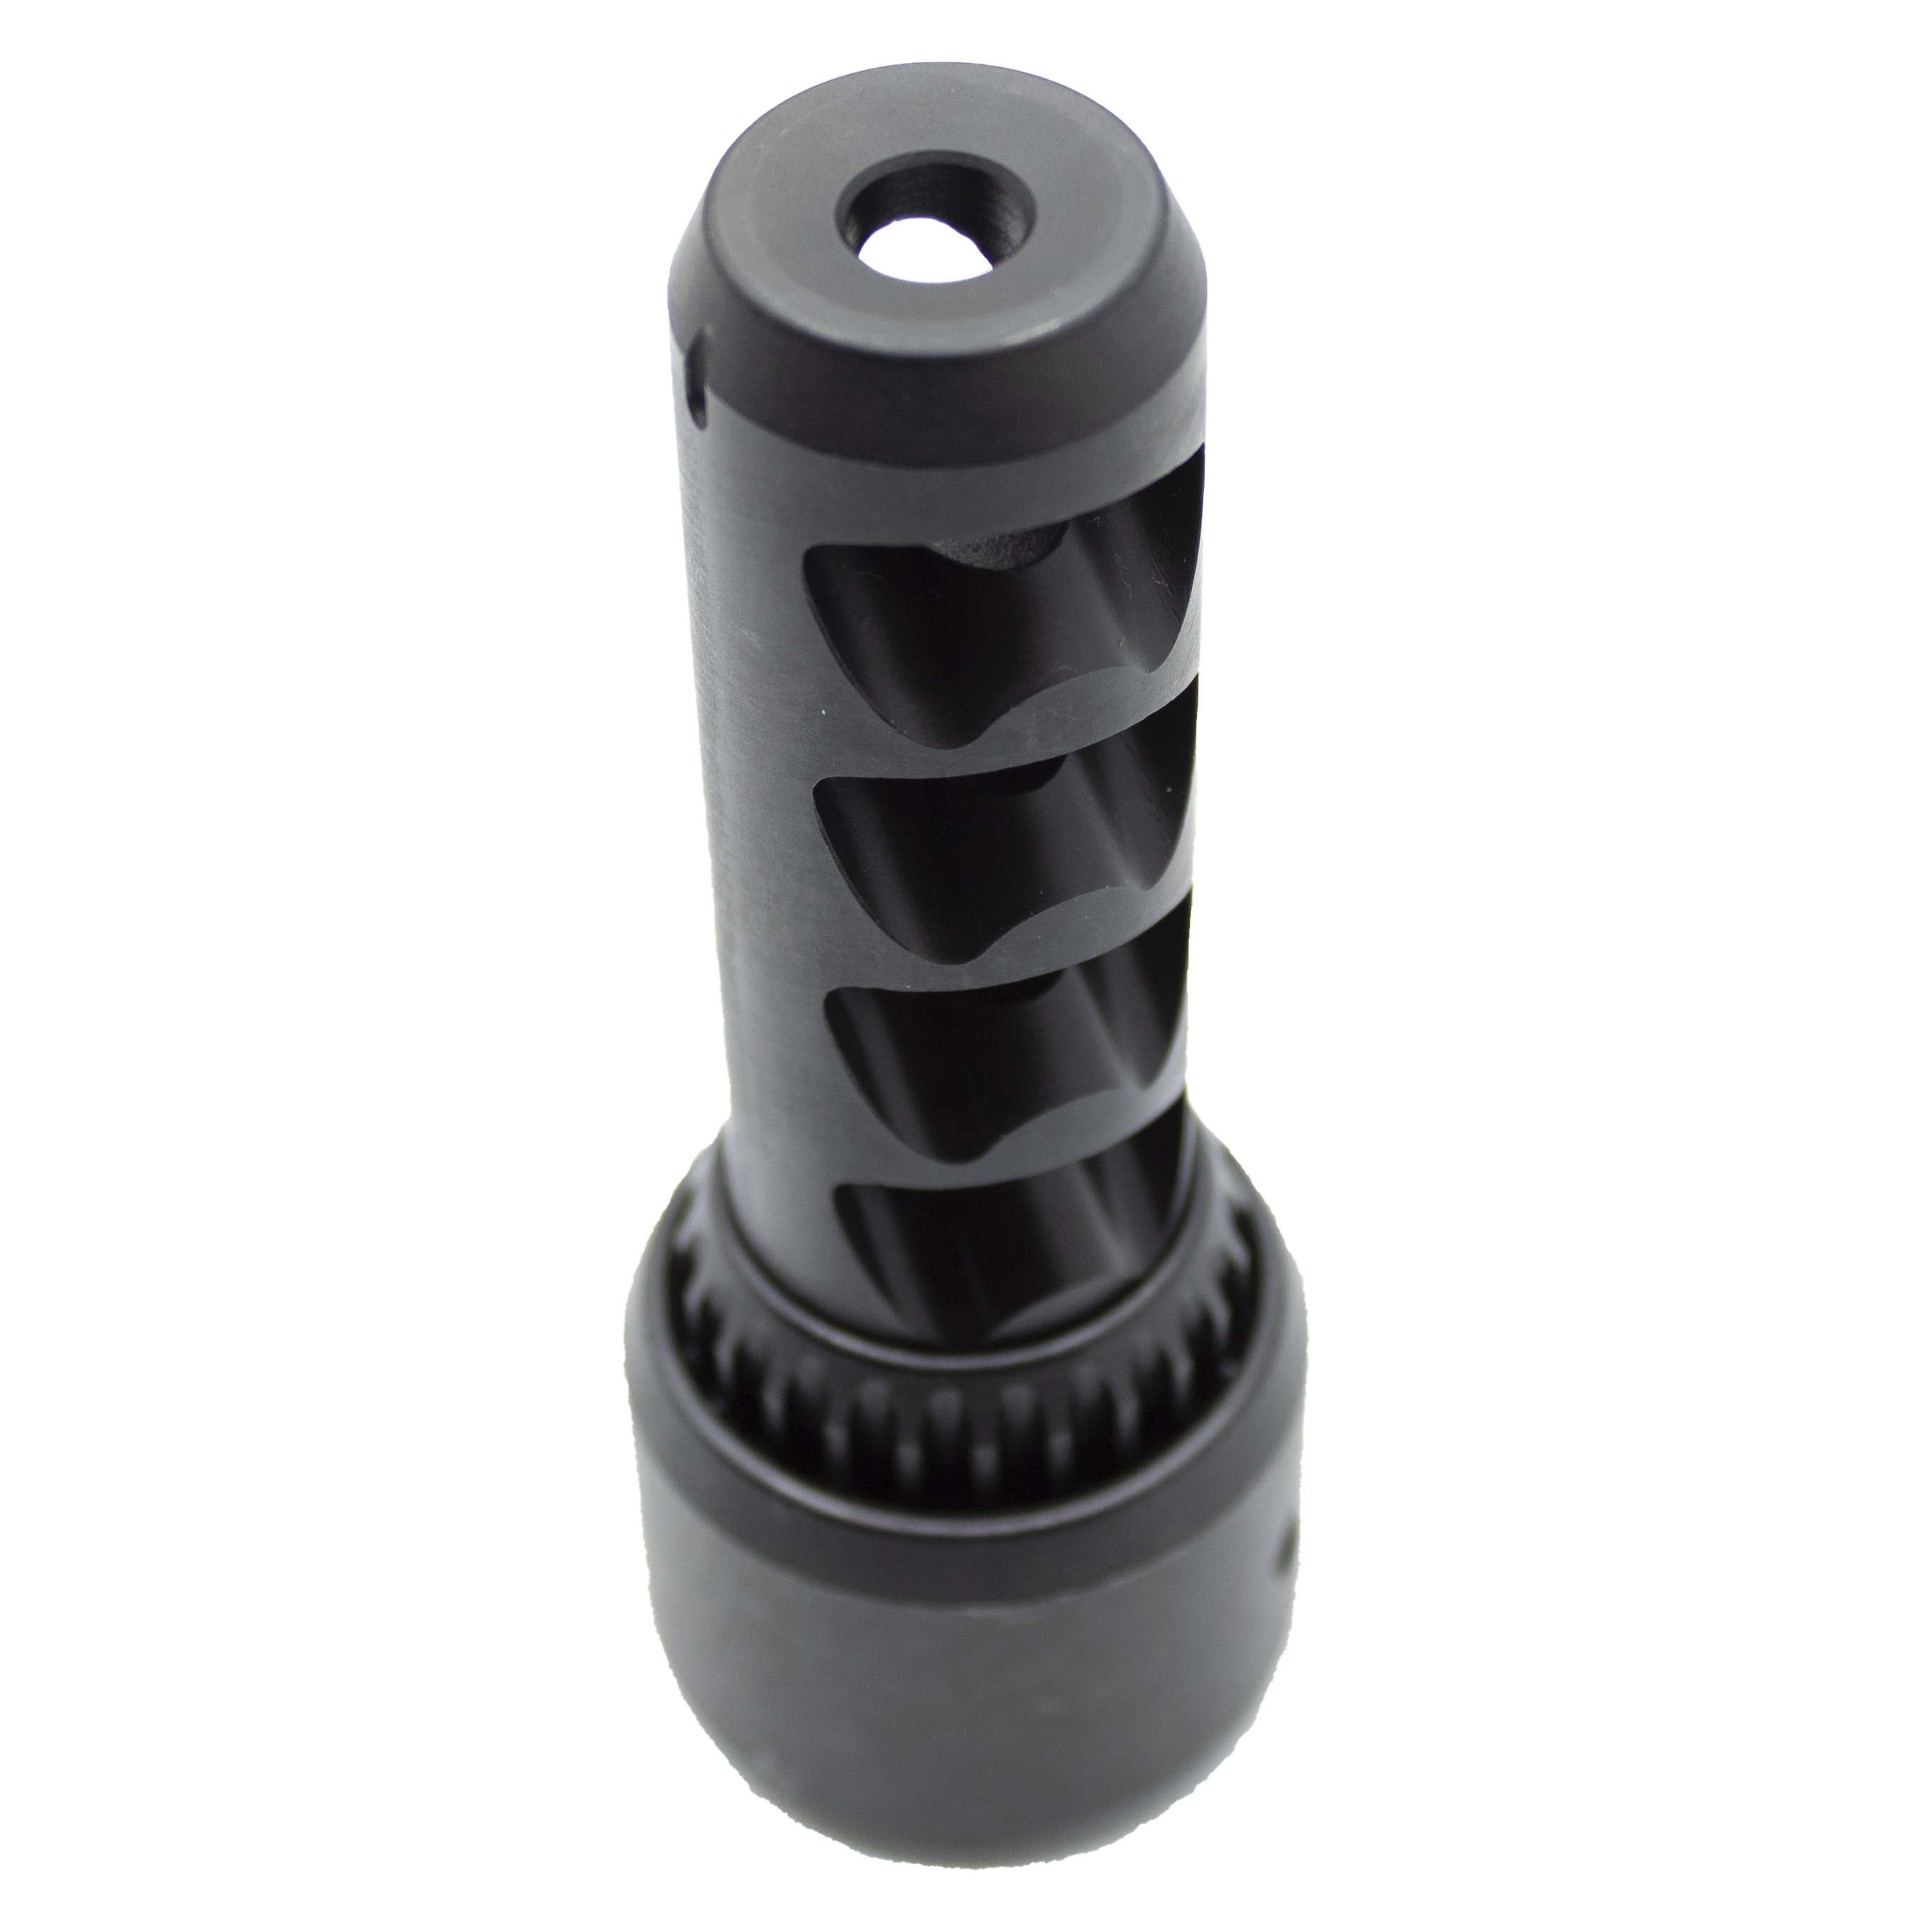 Tuner Muzzle Brake - Strike Without Warning Questions & Answers